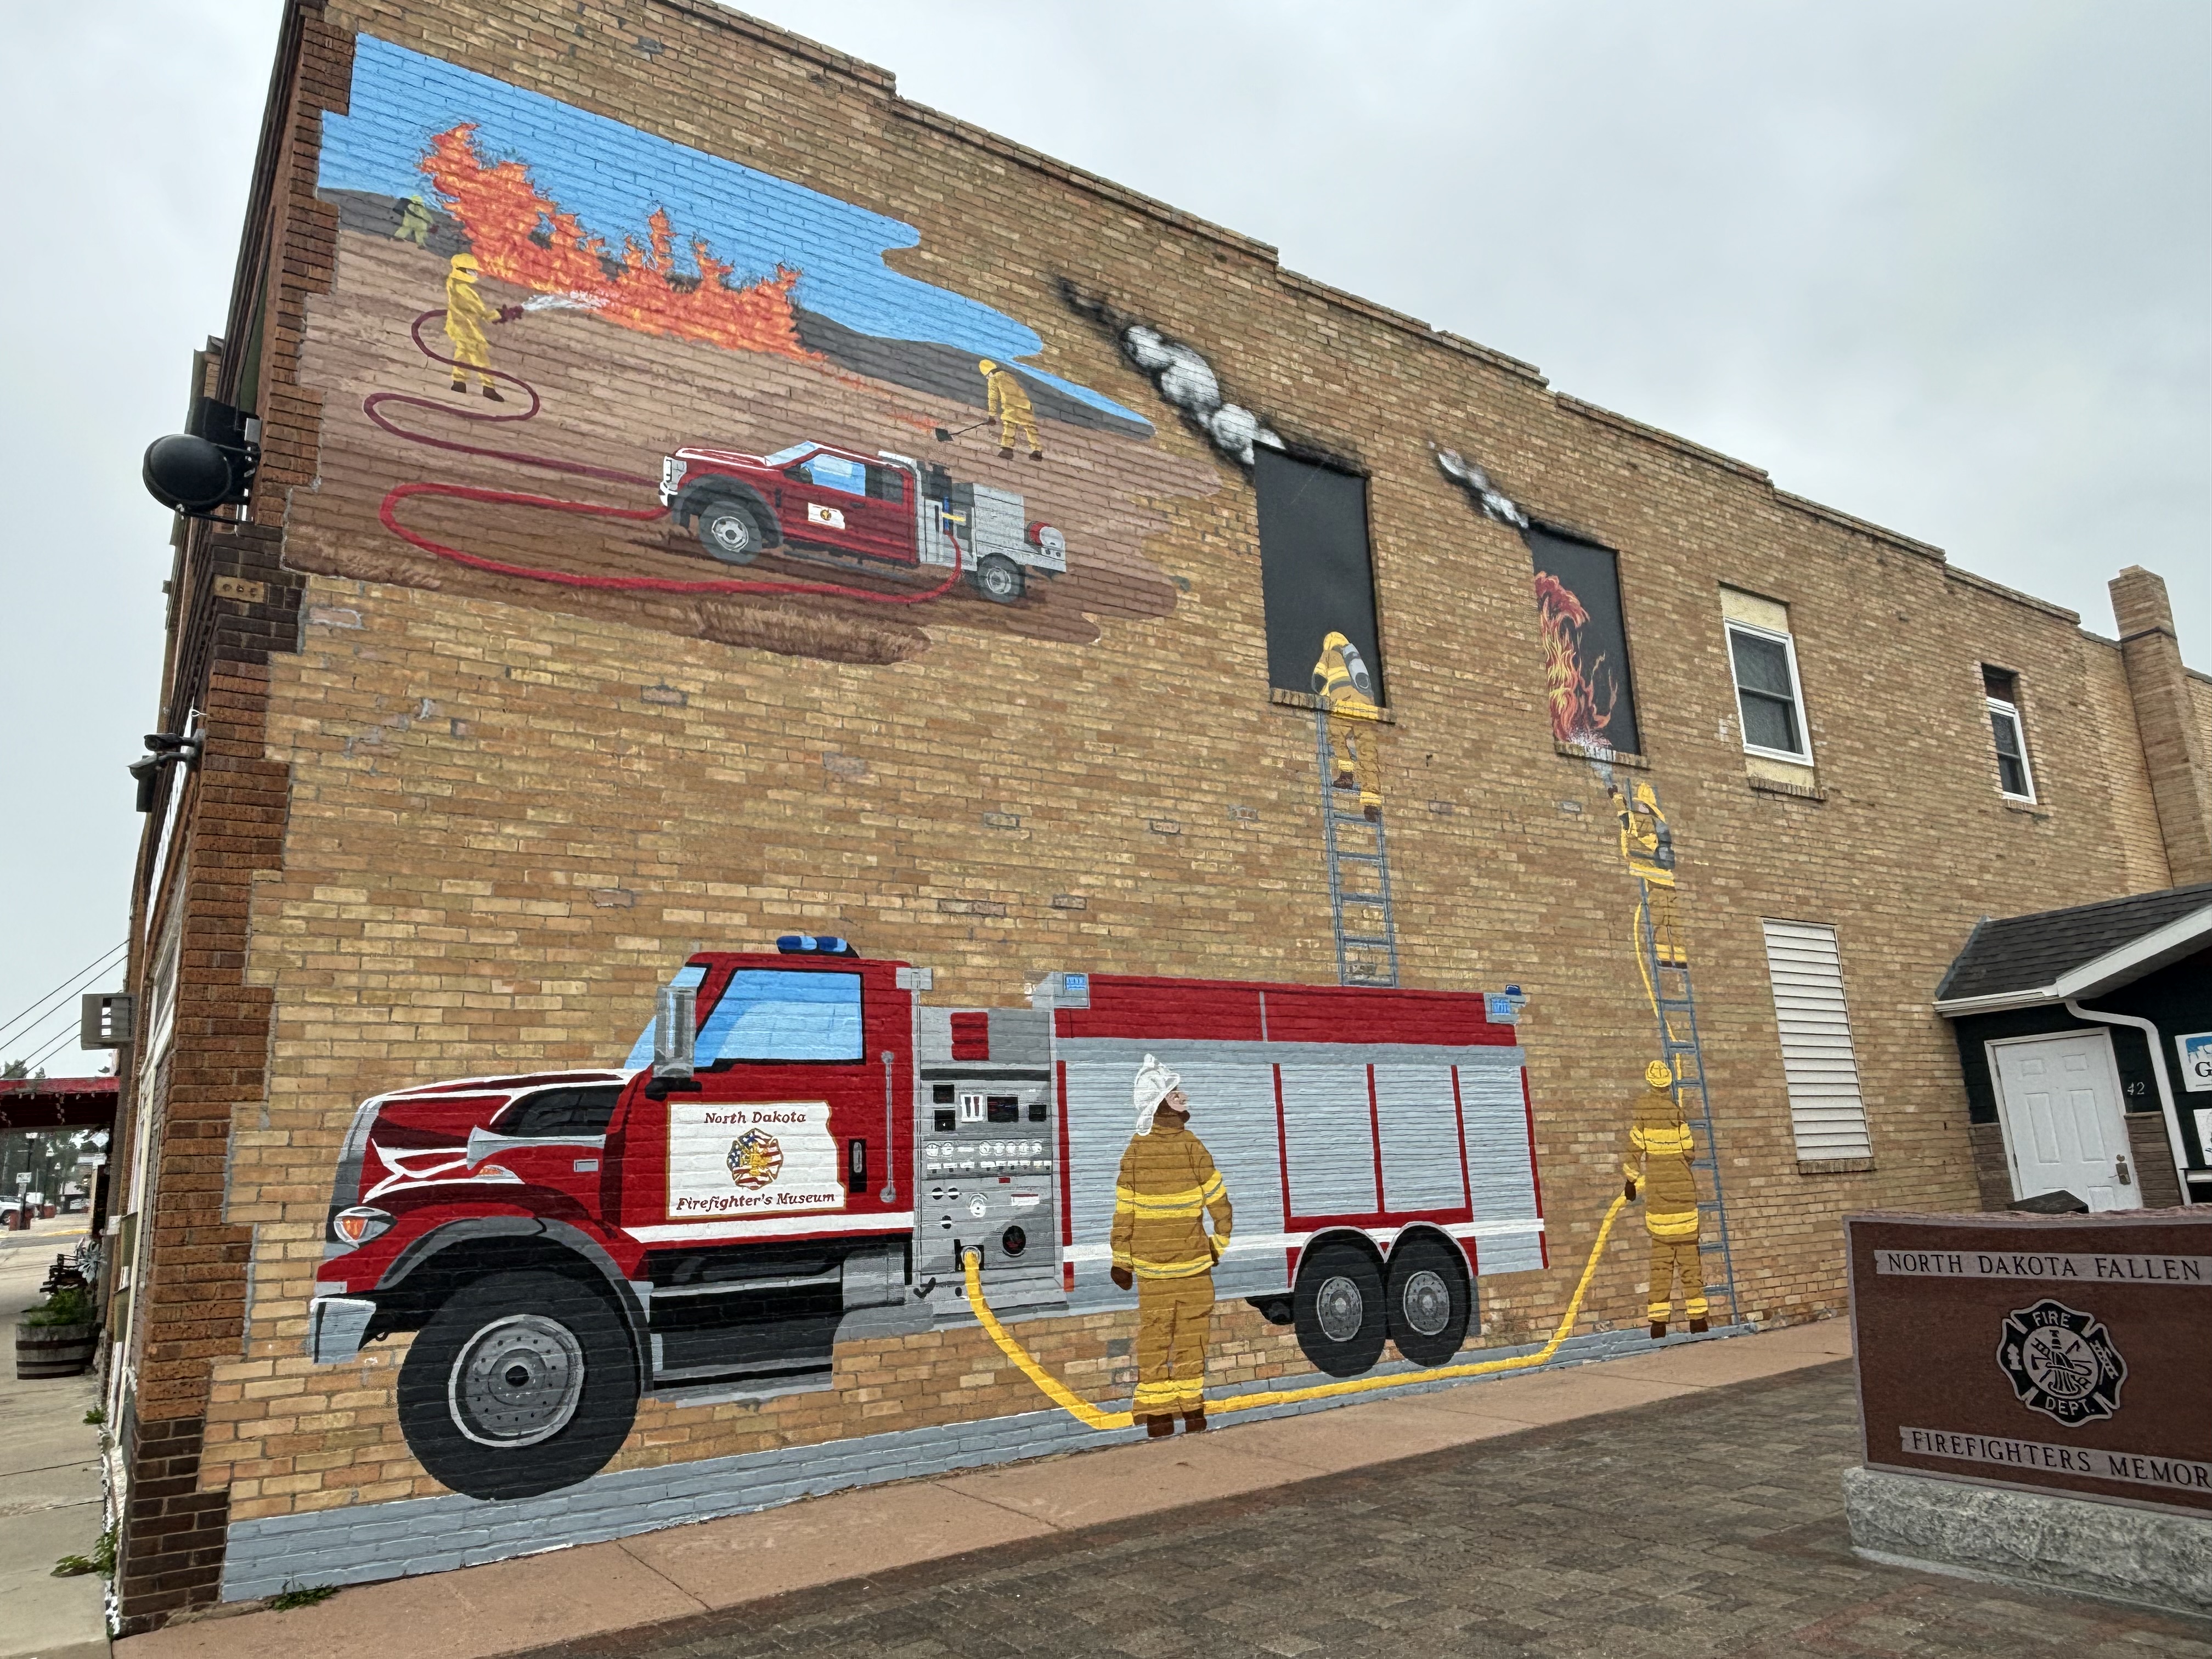 NDFM mural makes its debut